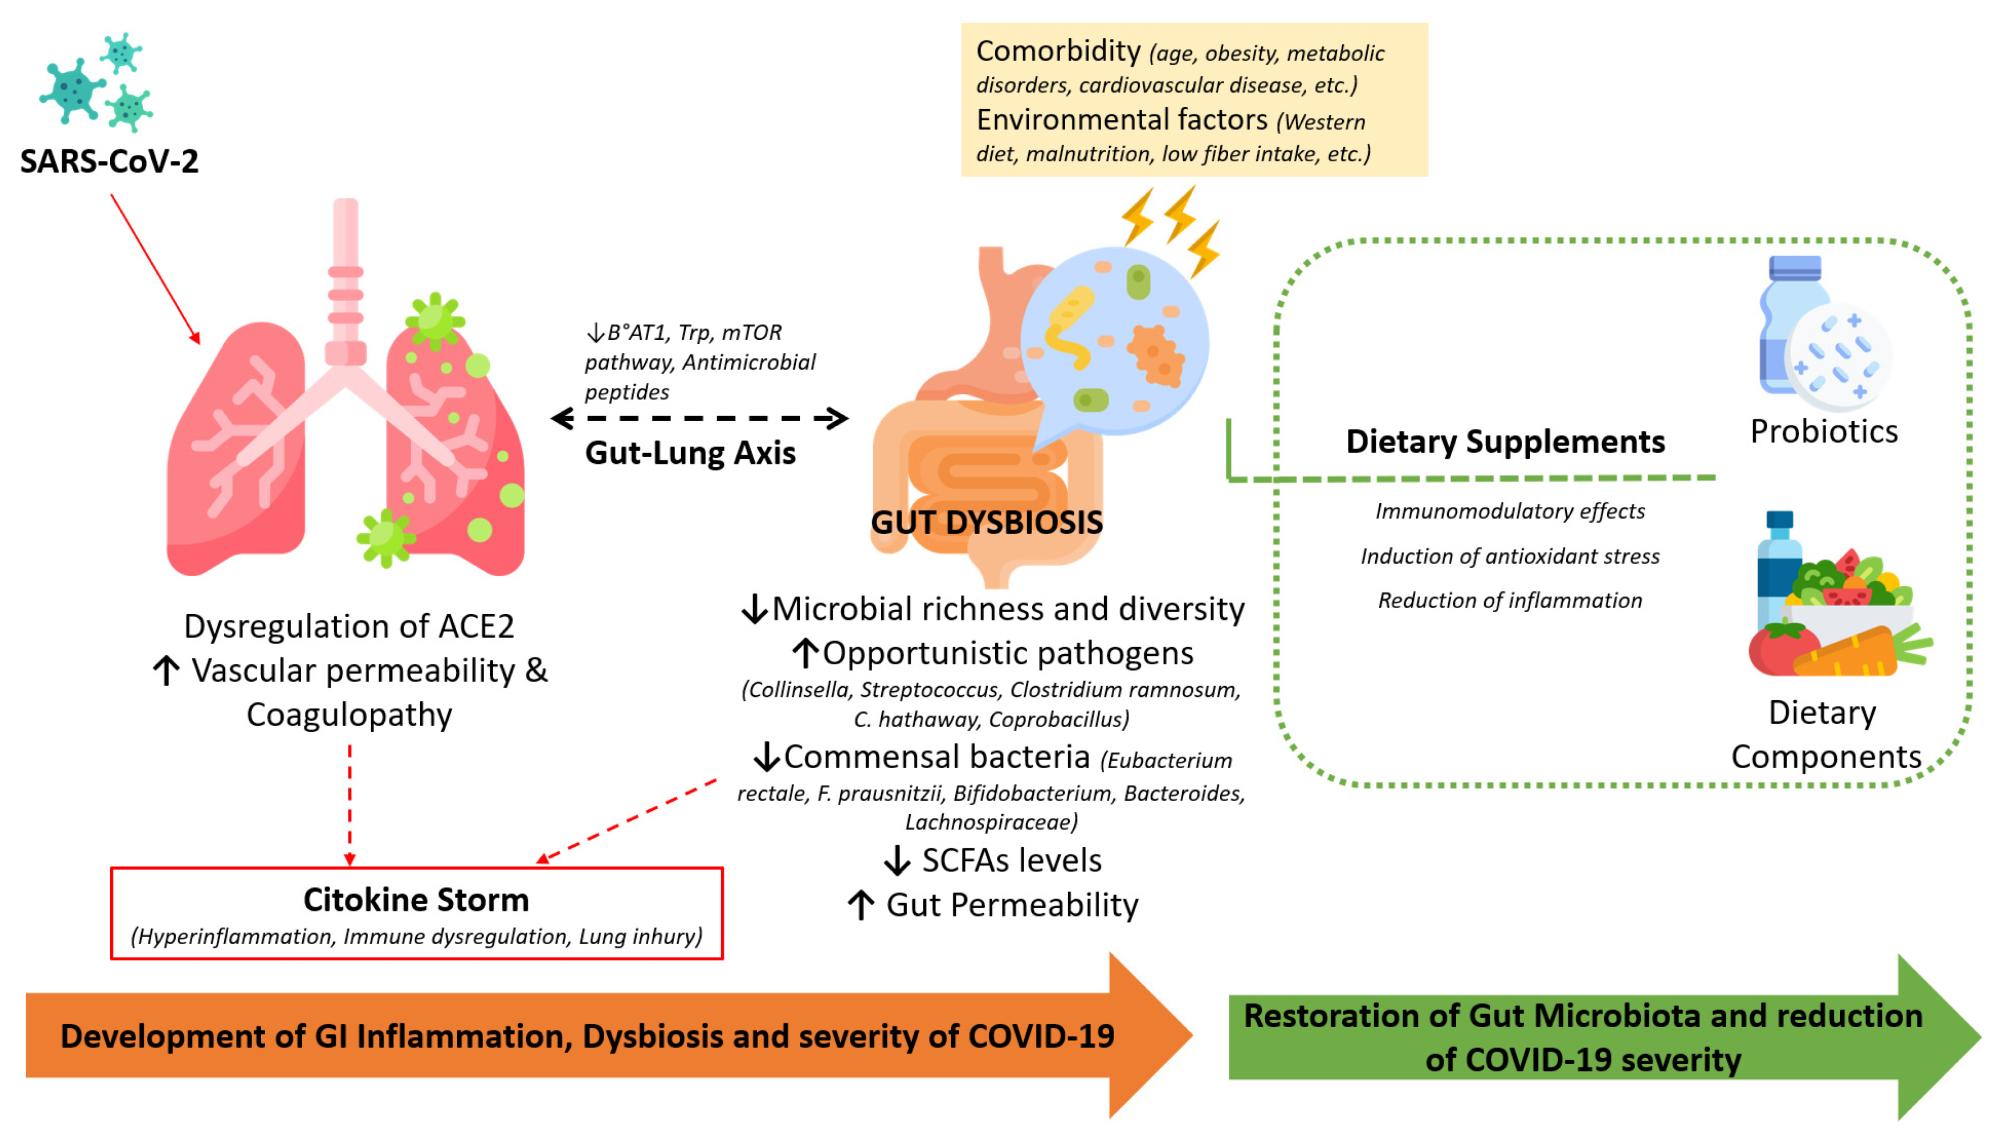 The involvement of the infection-induced dysregulation of ACE-2, comorbidities, and alterations in the gut microbiota during COVID-19 and the beneficial effects of dietary supplements in restoring the microbiota and immune homeostasis.